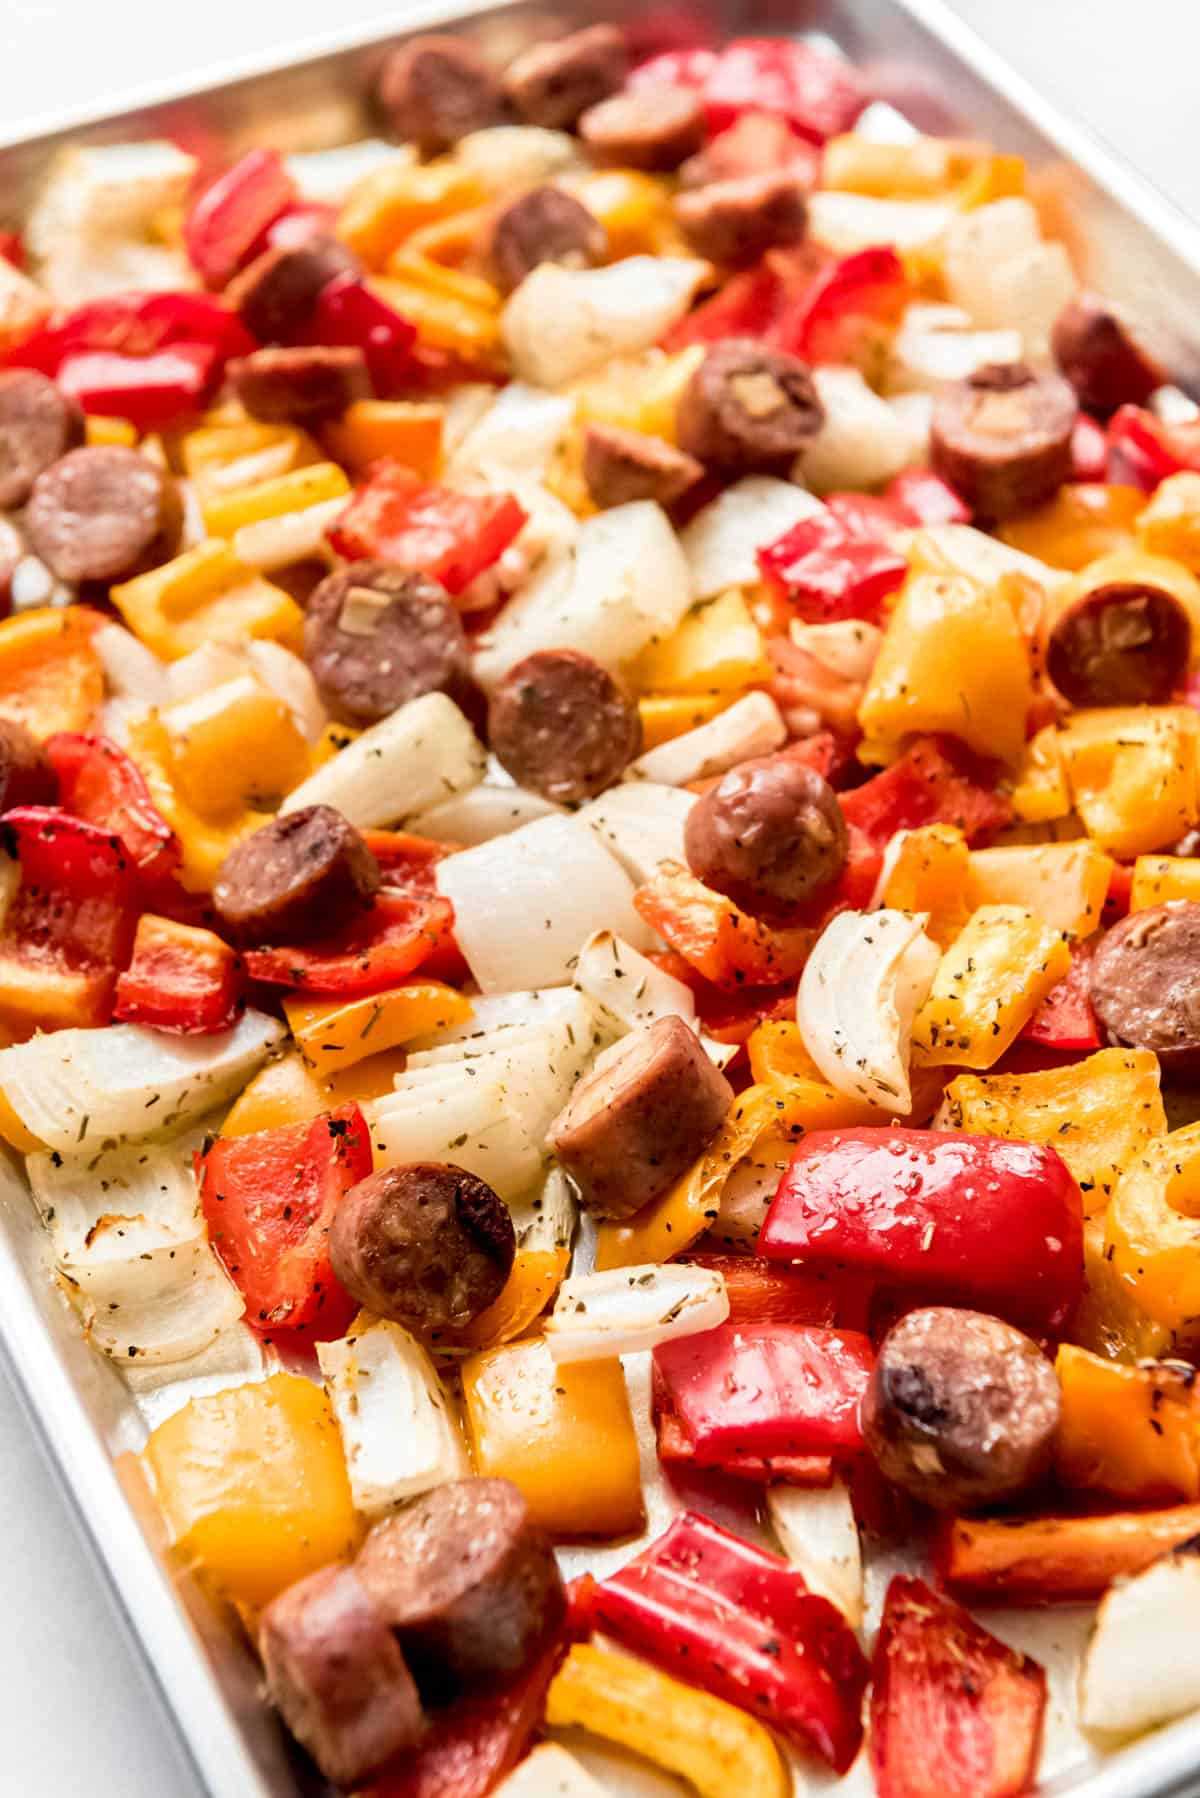 Roasted peppers, onions, and sausages on a baking sheet.